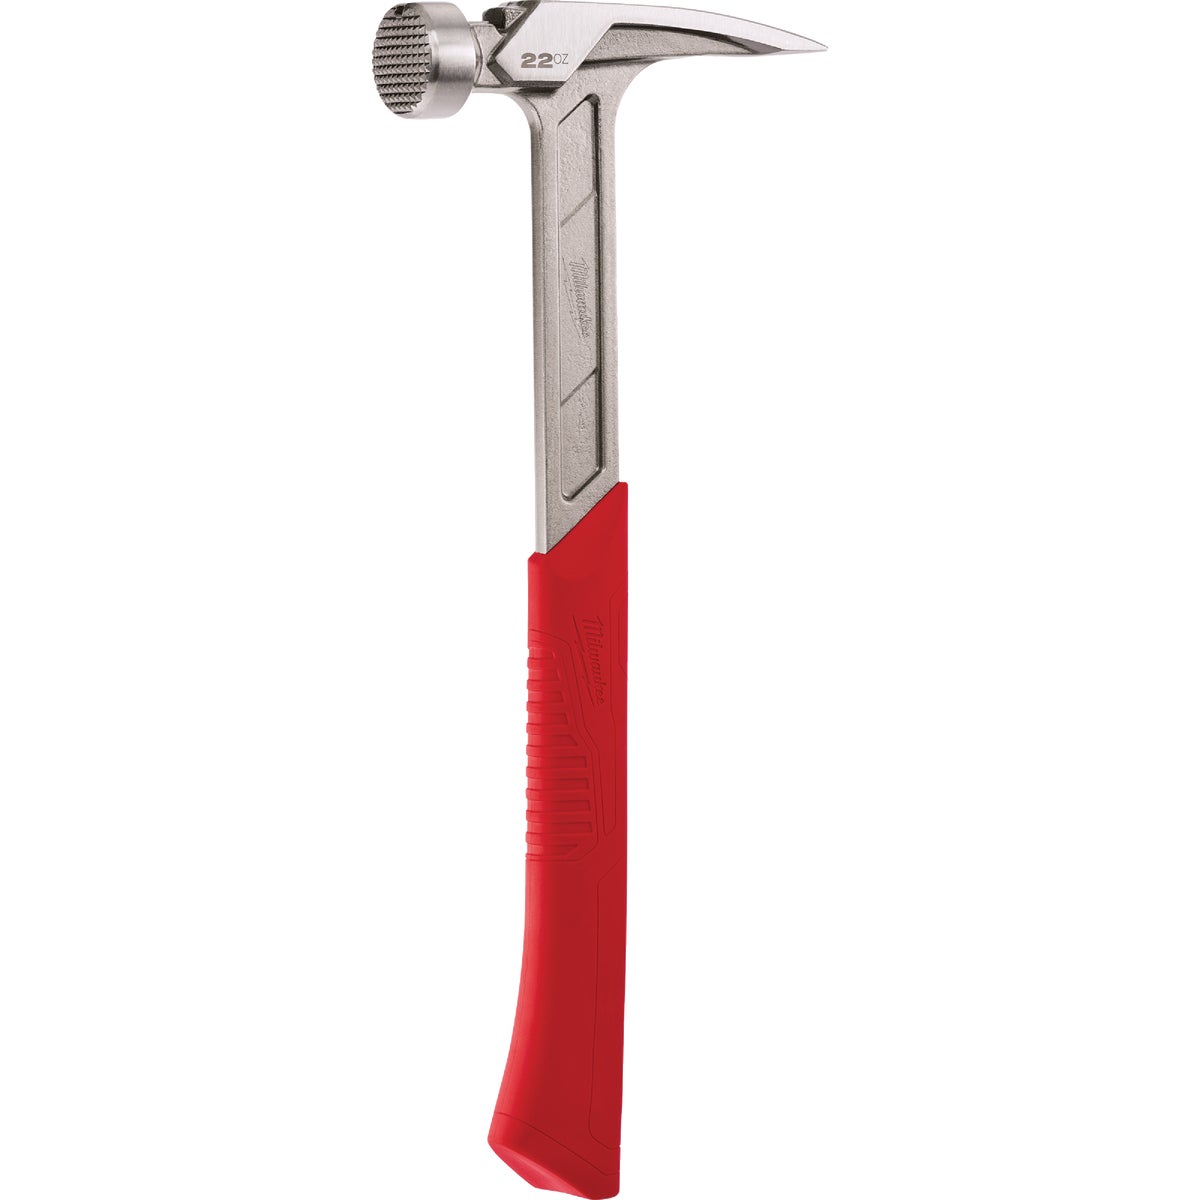 Milwaukee 22 Oz. Milled-Face Framing Hammer with Steel I-Beam Handle